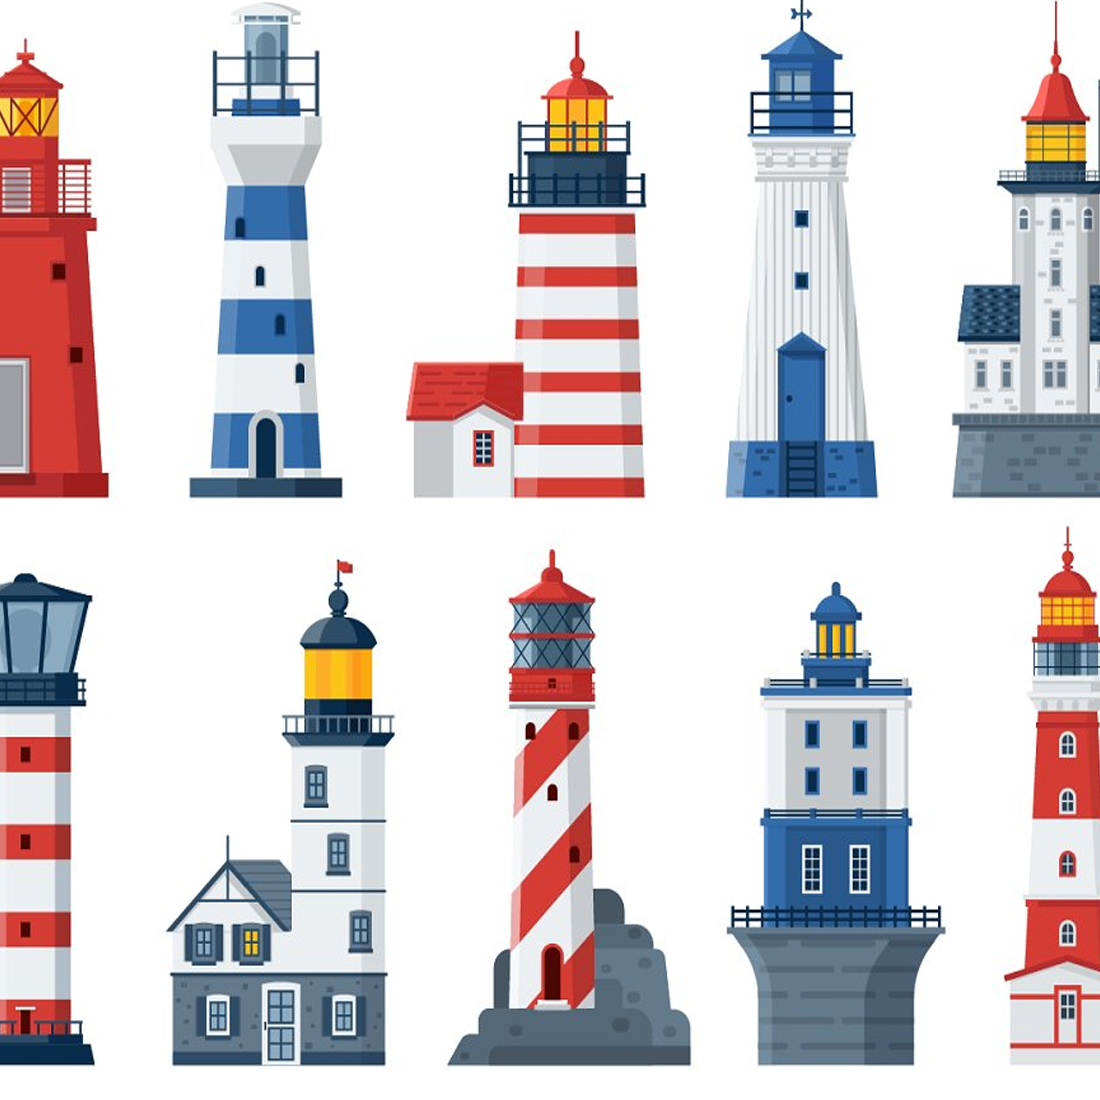 Images rpeview lighthouse icons and patterns.